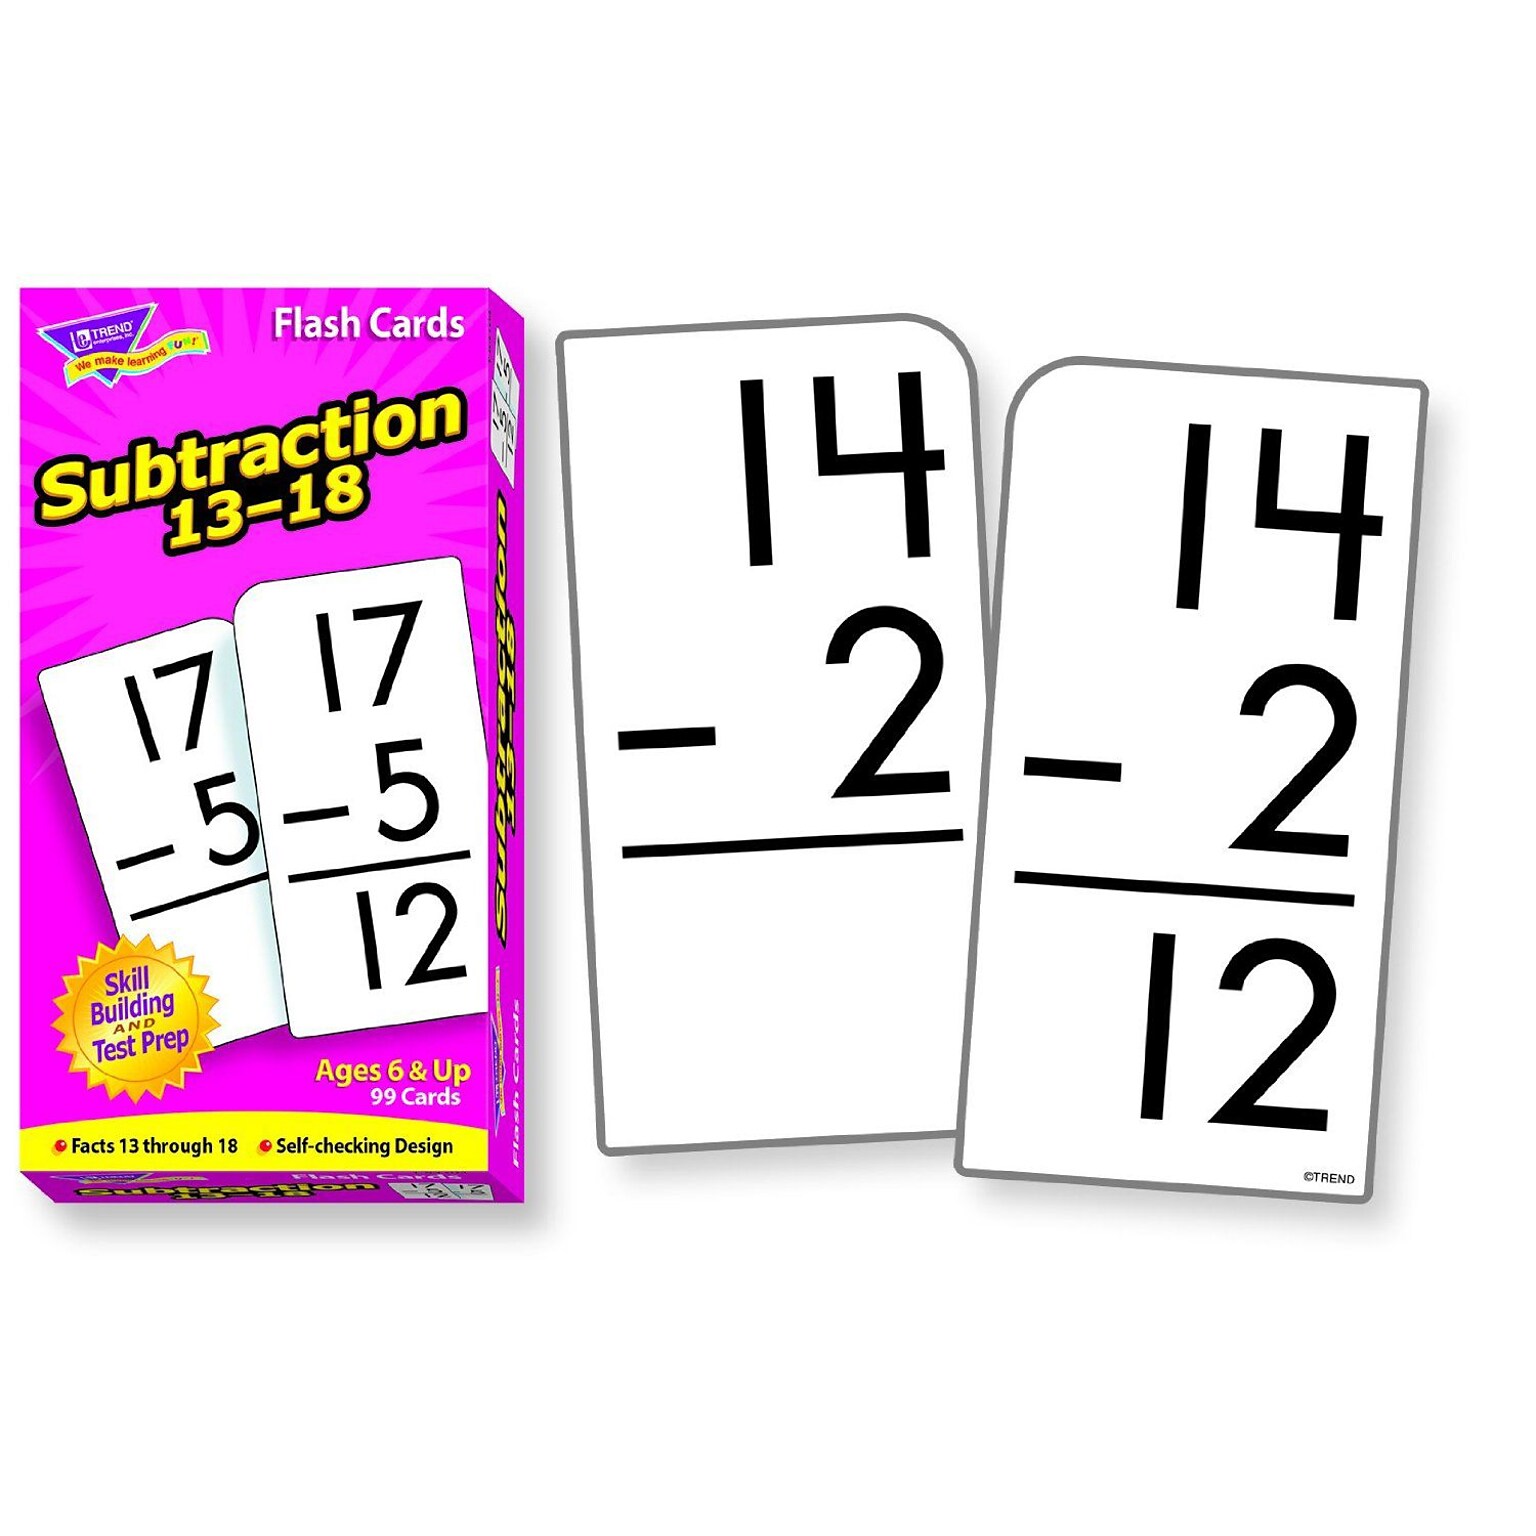 Subtraction 13-18 Skill Drill Flash Cards for Grades 1-4, 99 Pack (T-53104)